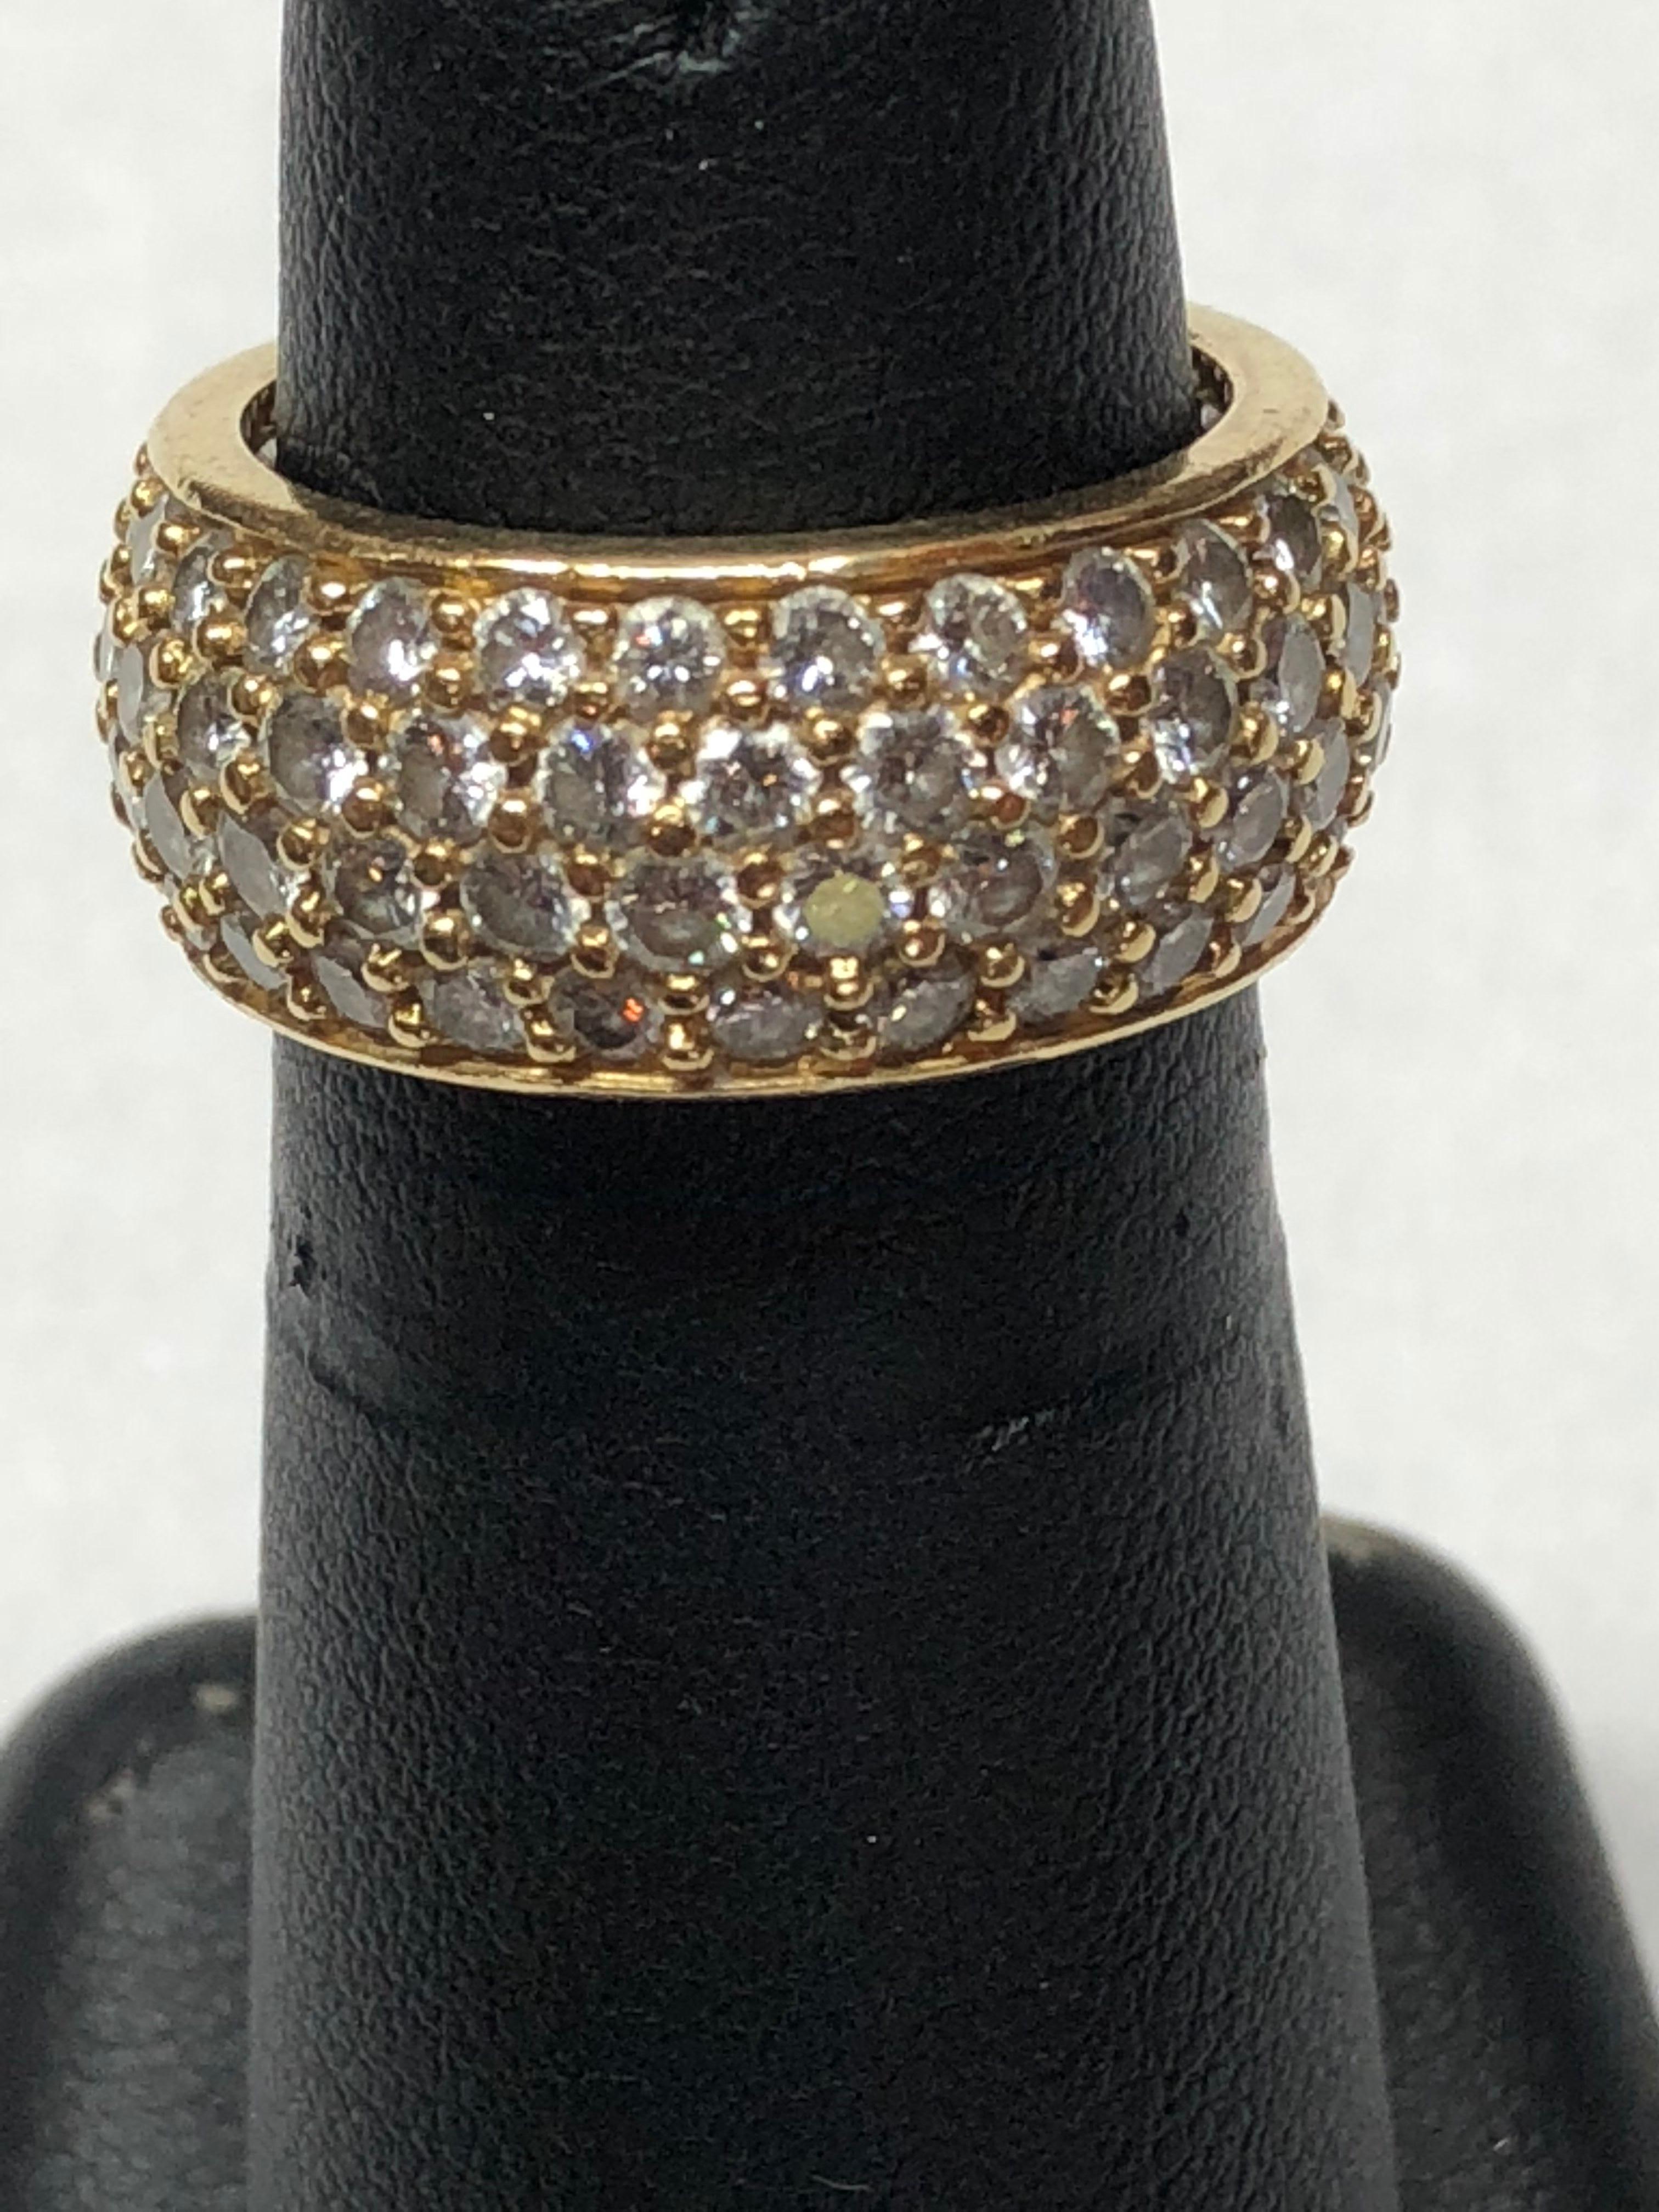 Lady's 18K yellow gold 4 row diamond eternity ring containing 104 brilliant cut diamonds of overall G color, VS1 clarity, weighing a total of 4.30 carats.  Manufactured by Kurt Wayne, Inc. Serial #119878.  Size 6.